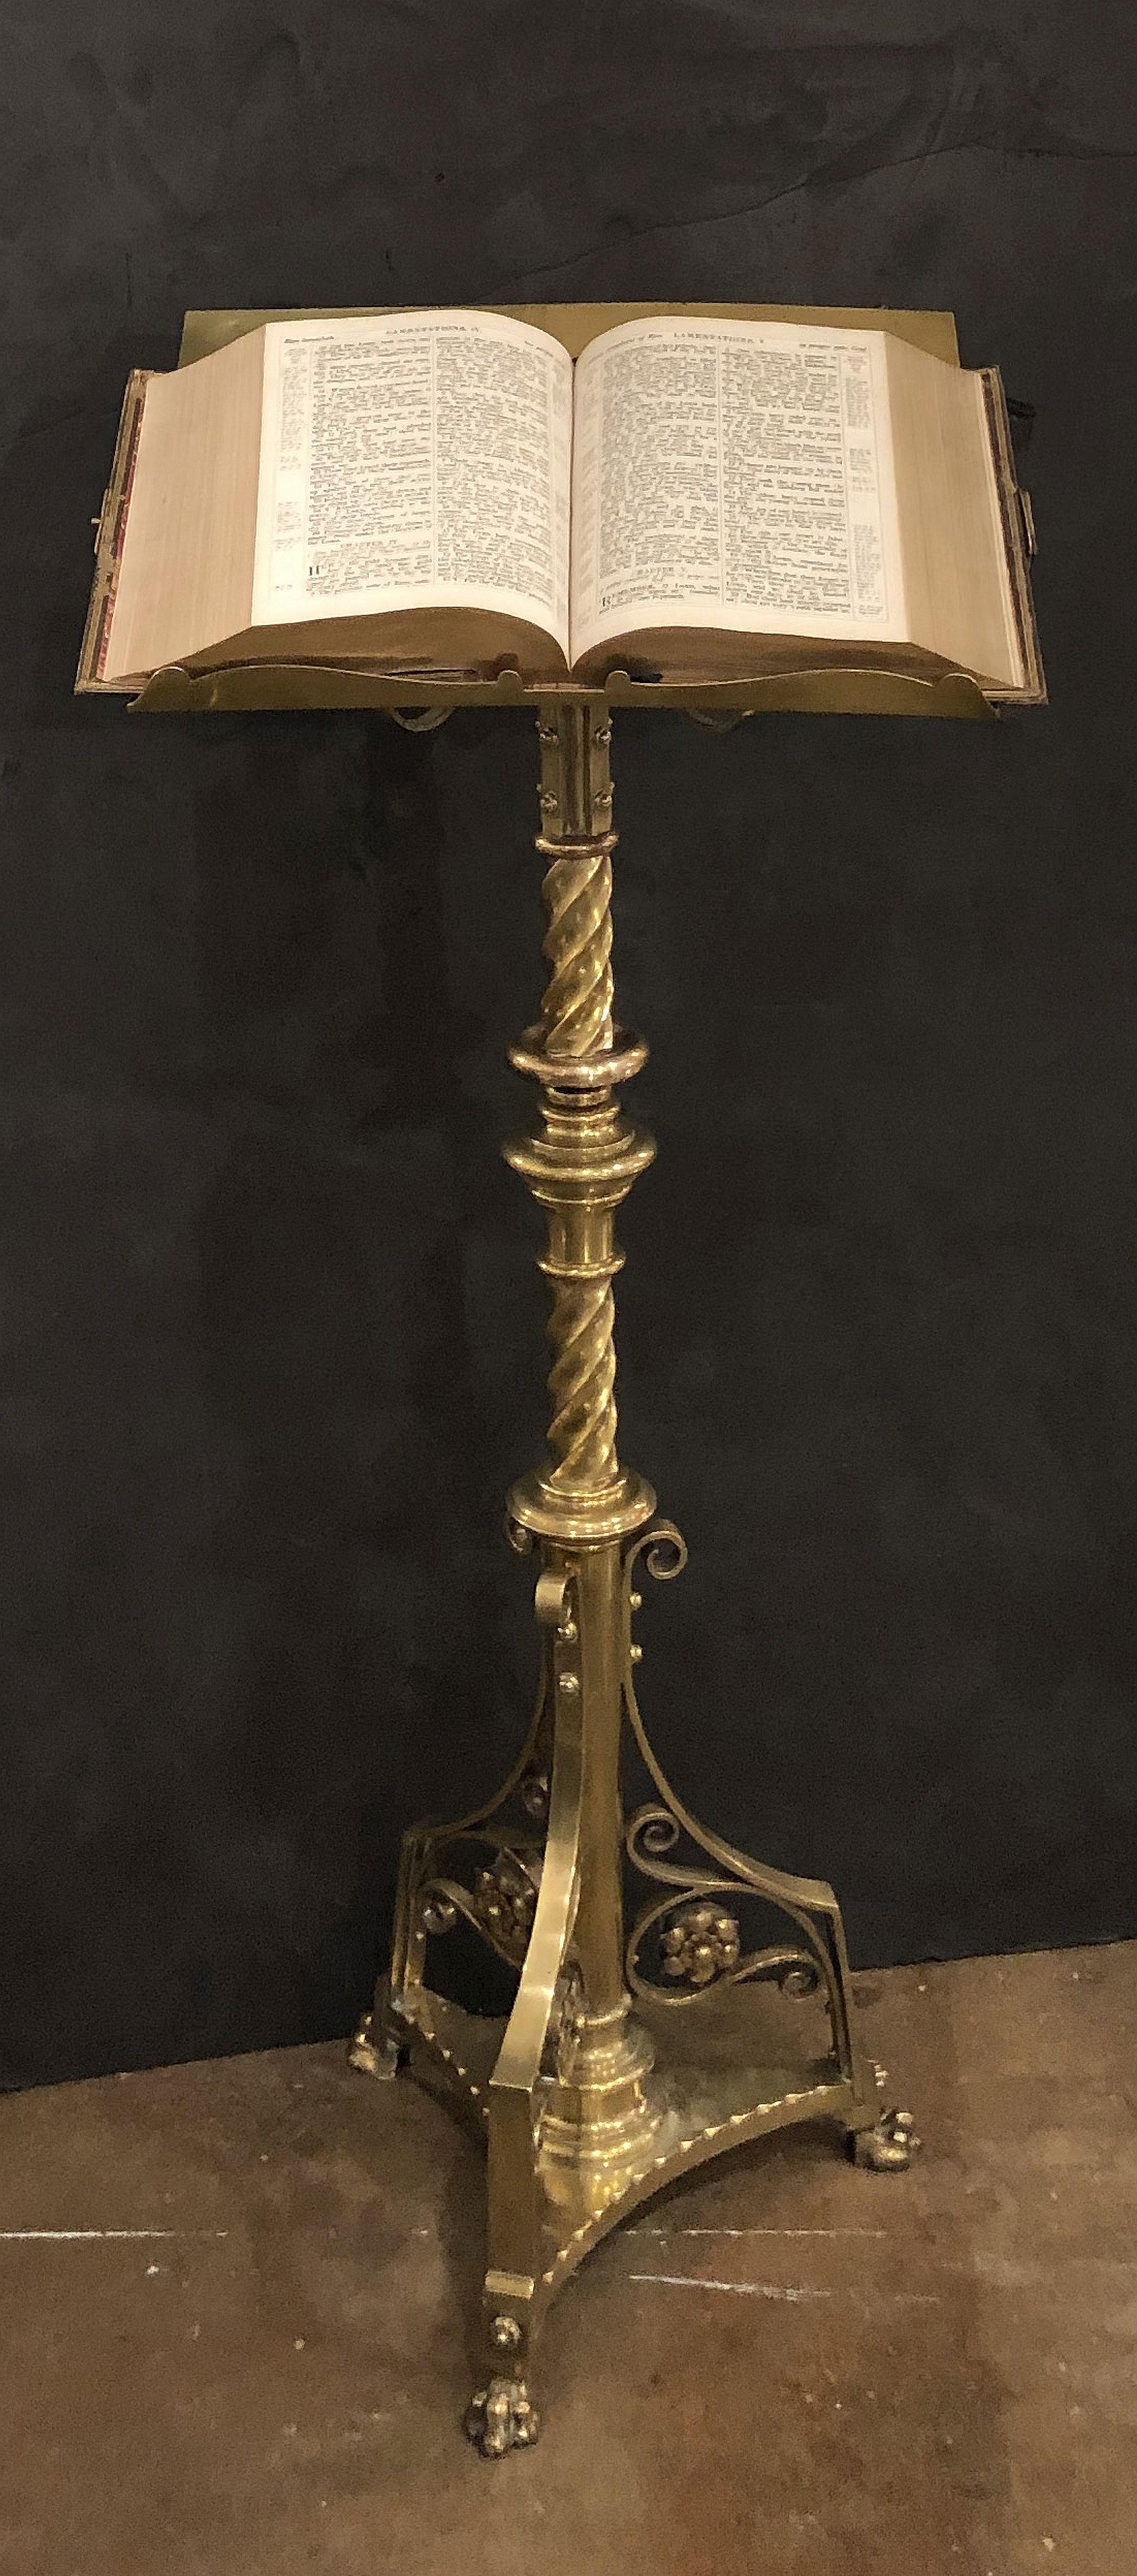 A handsome large English ecclesiastical standing lectern of brass, featuring a rotating easel top with a design of quatrefoils surrounding a center quatrefoil with fleur-de-lis, one side with slanted support rest for a book, mounted to a decorative